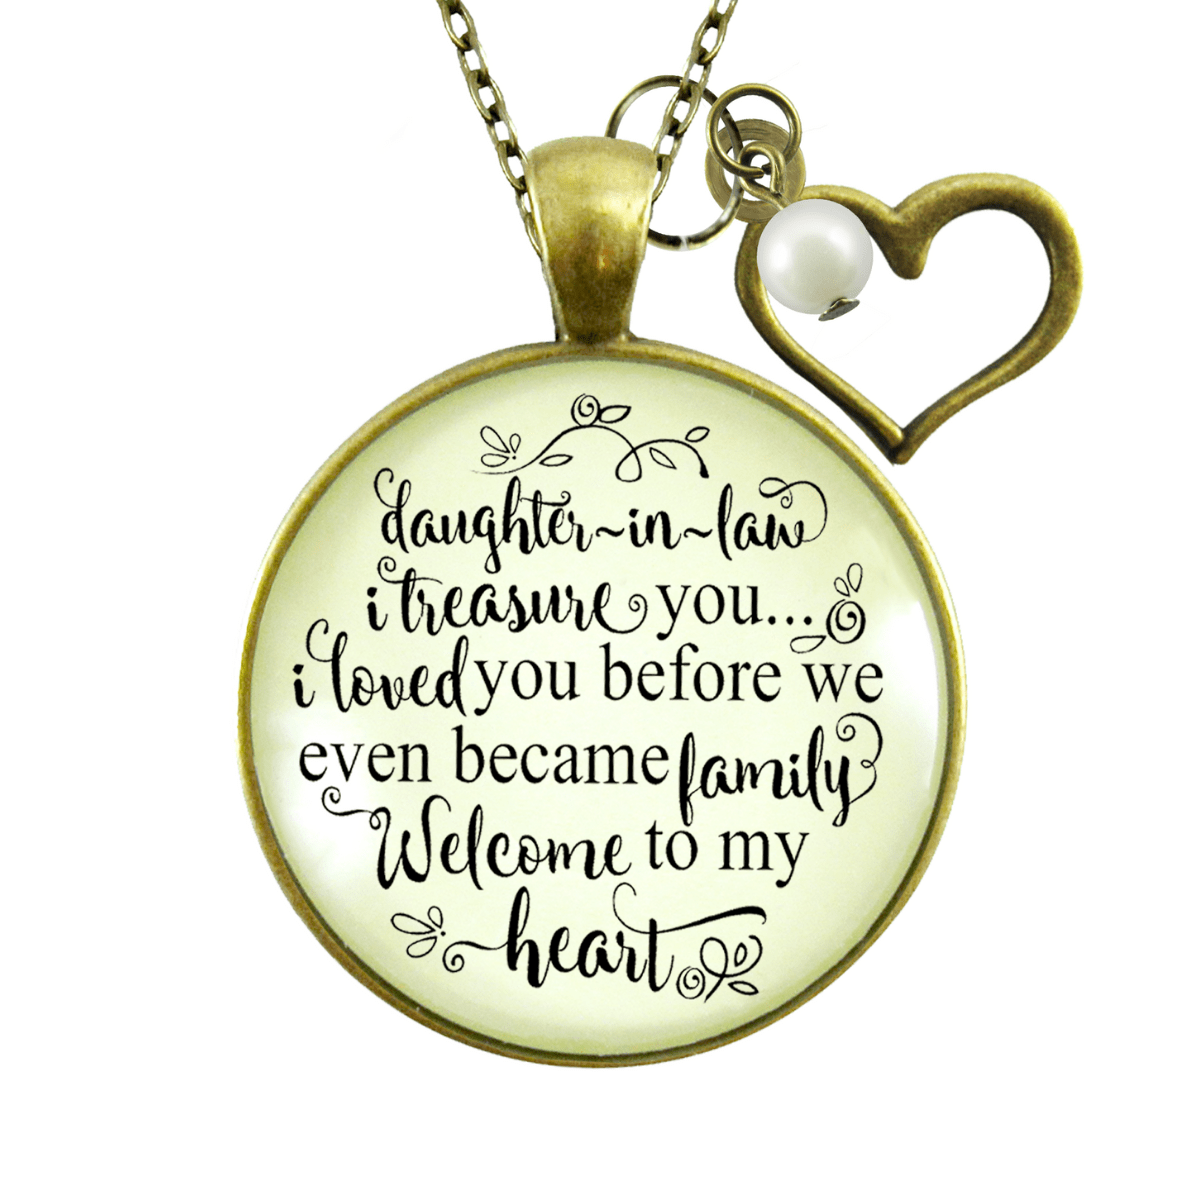 Gutsy Goodness Daughter in Law Necklace Treasure You Love Family Meaningful Jewelry - Gutsy Goodness;Daughter In Law Necklace Treasure You Love Family Meaningful Jewelry - Gutsy Goodness Handmade Jewelry Gifts